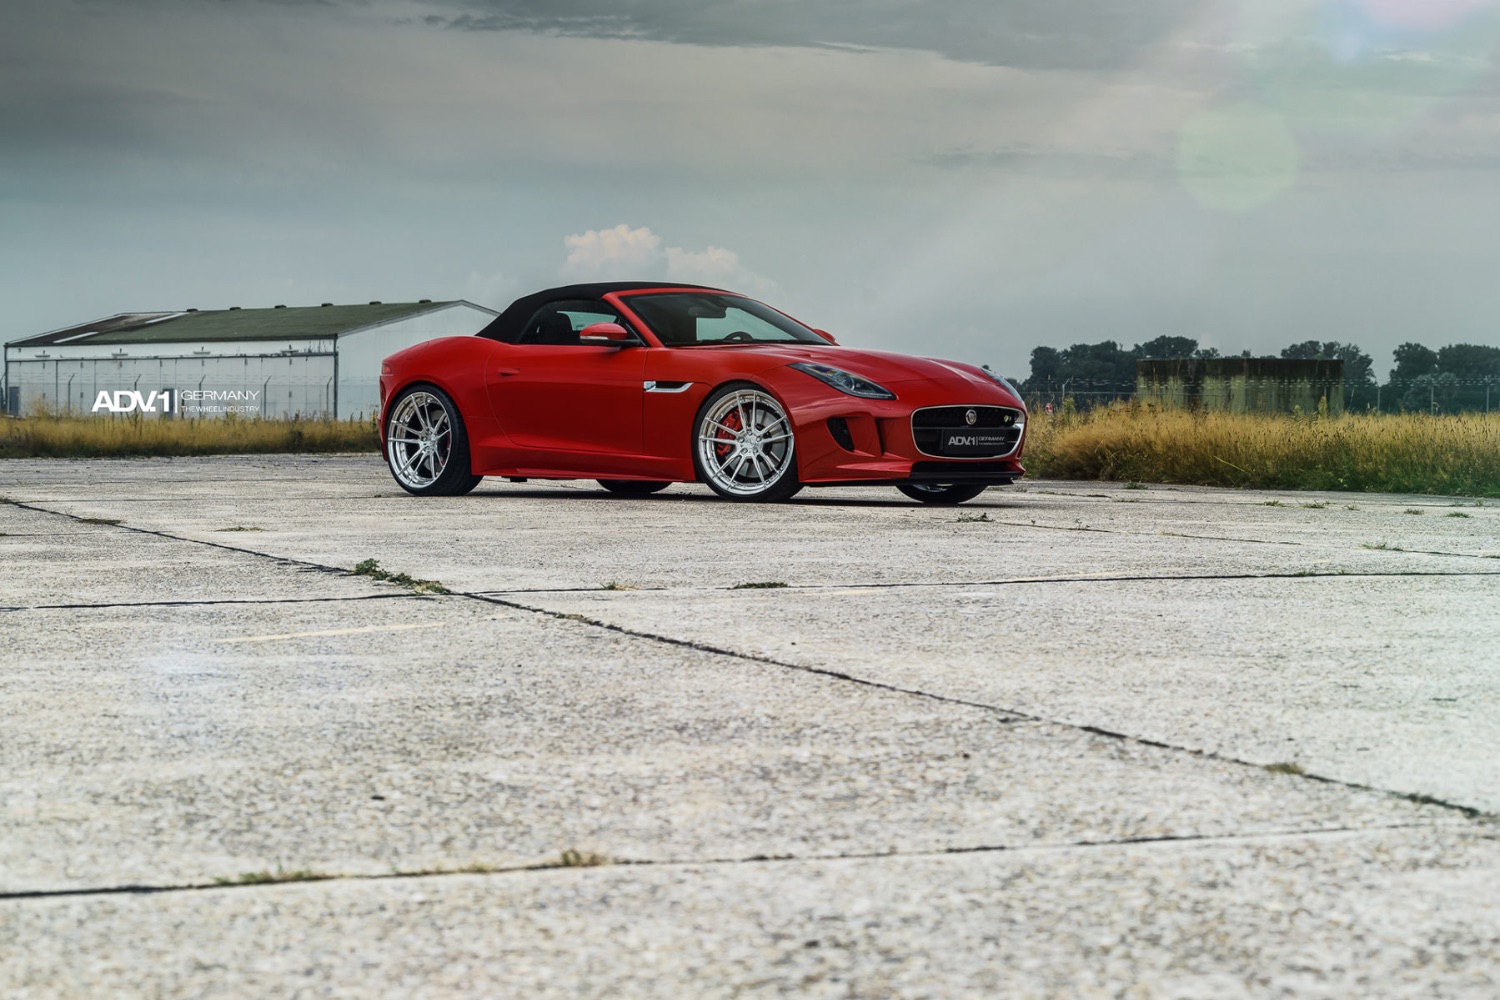 jaguar-f-type-cabriolet-convertible-red-aftermarket-lowered-chrome-luxury-adv1-wheels-forged-d